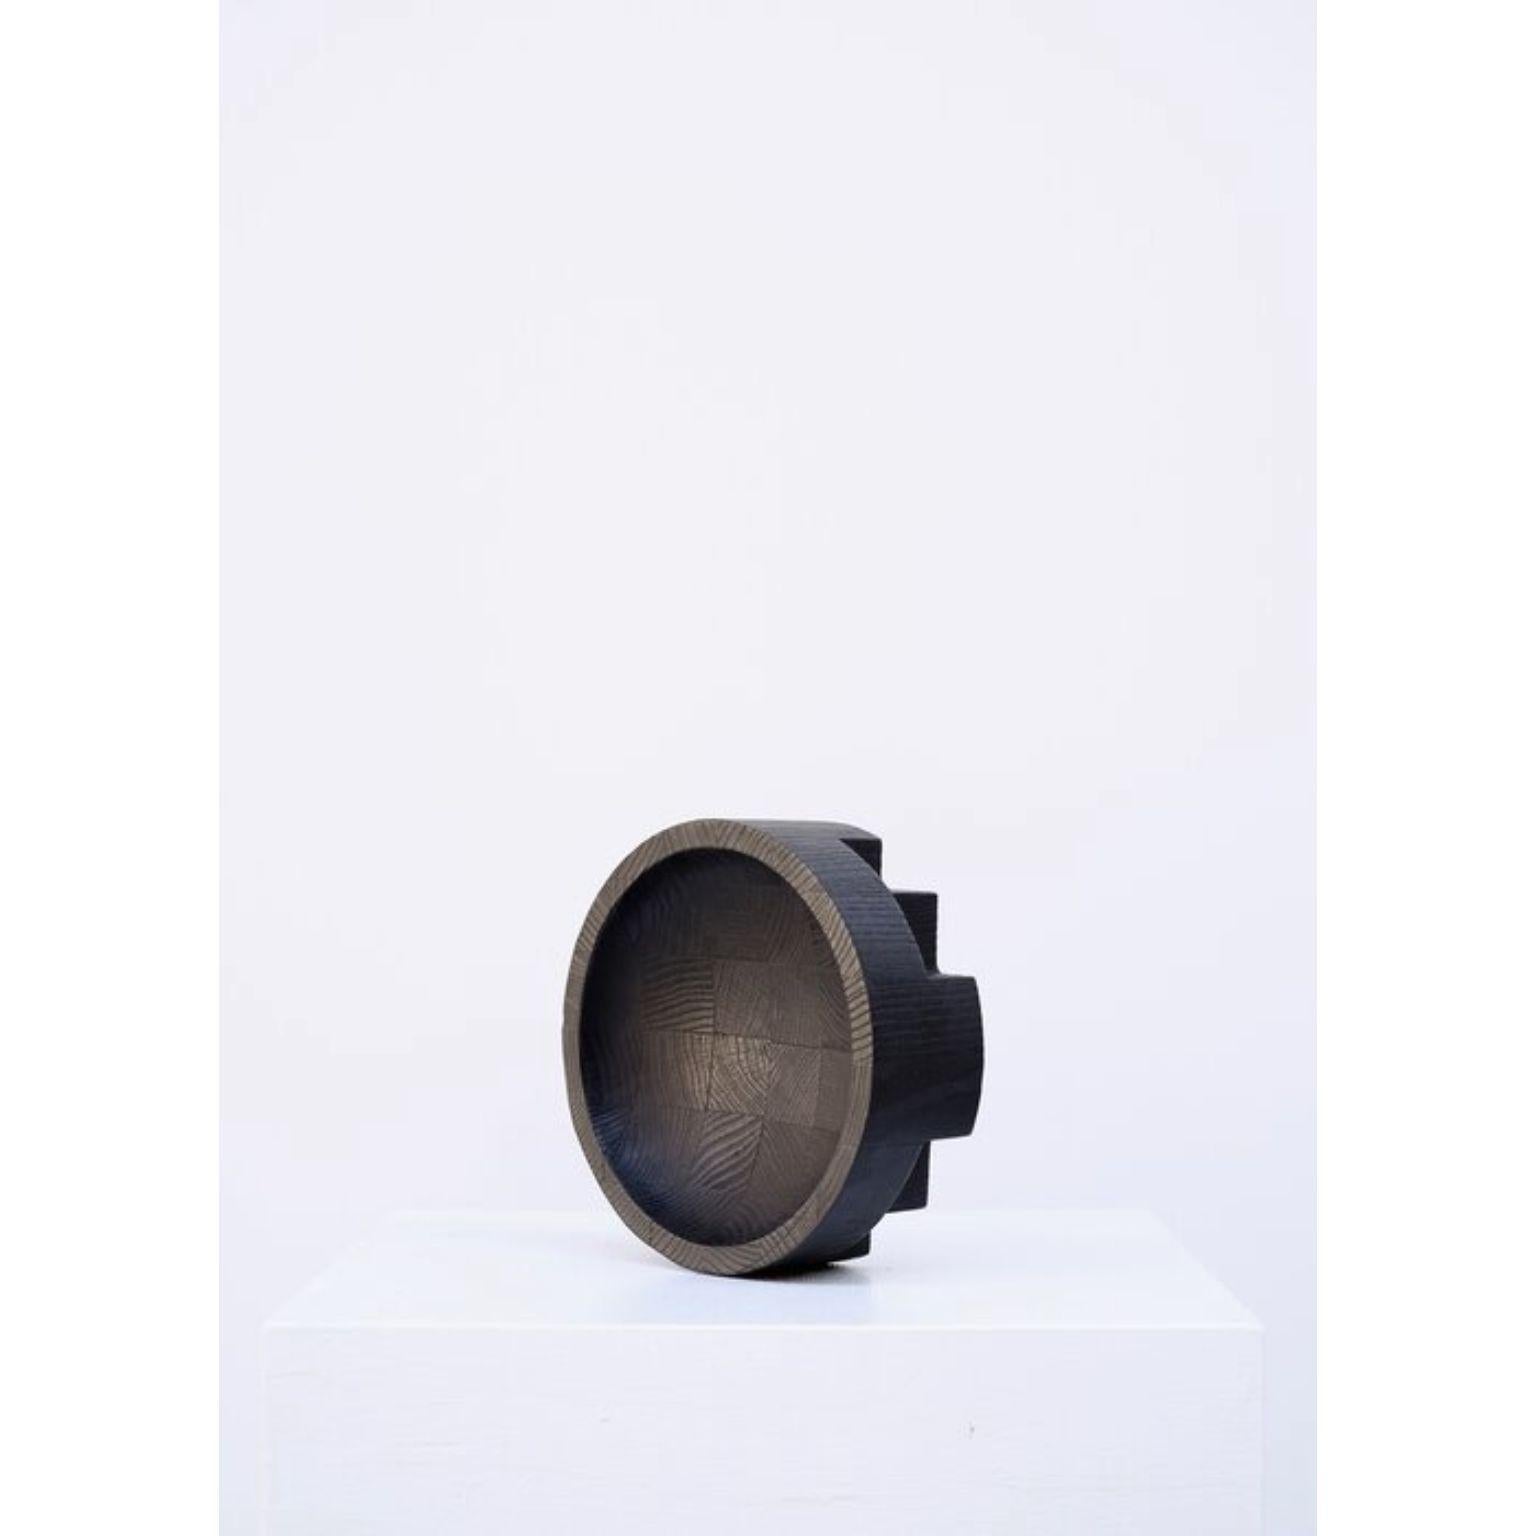 Disk tray large black by Arno Declercq.
Dimensions: D43 x W43 x H9 cm.
Meterials: burned and waxed Oak.
Signed by Arno Declercq.

Arno Declercq
Belgian designer and art dealer who makes bespoke objects with passion for design, atmosphere,